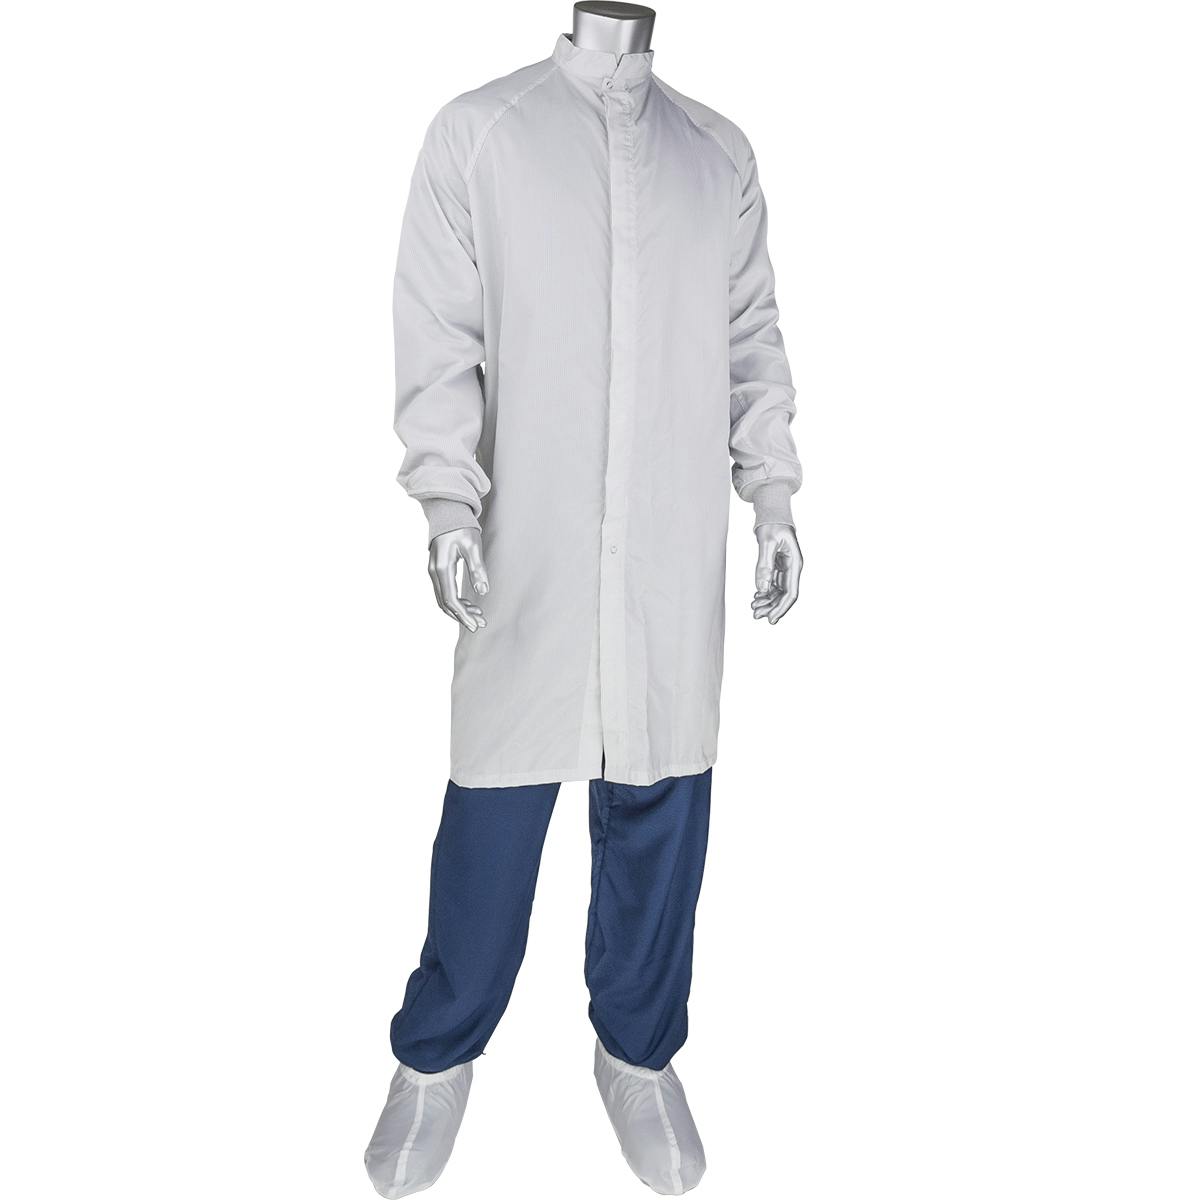 Disctek 2.5 Grid ISO 4 (Class 10) Cleanroom Frock, White (CFRZC-89WH)_0